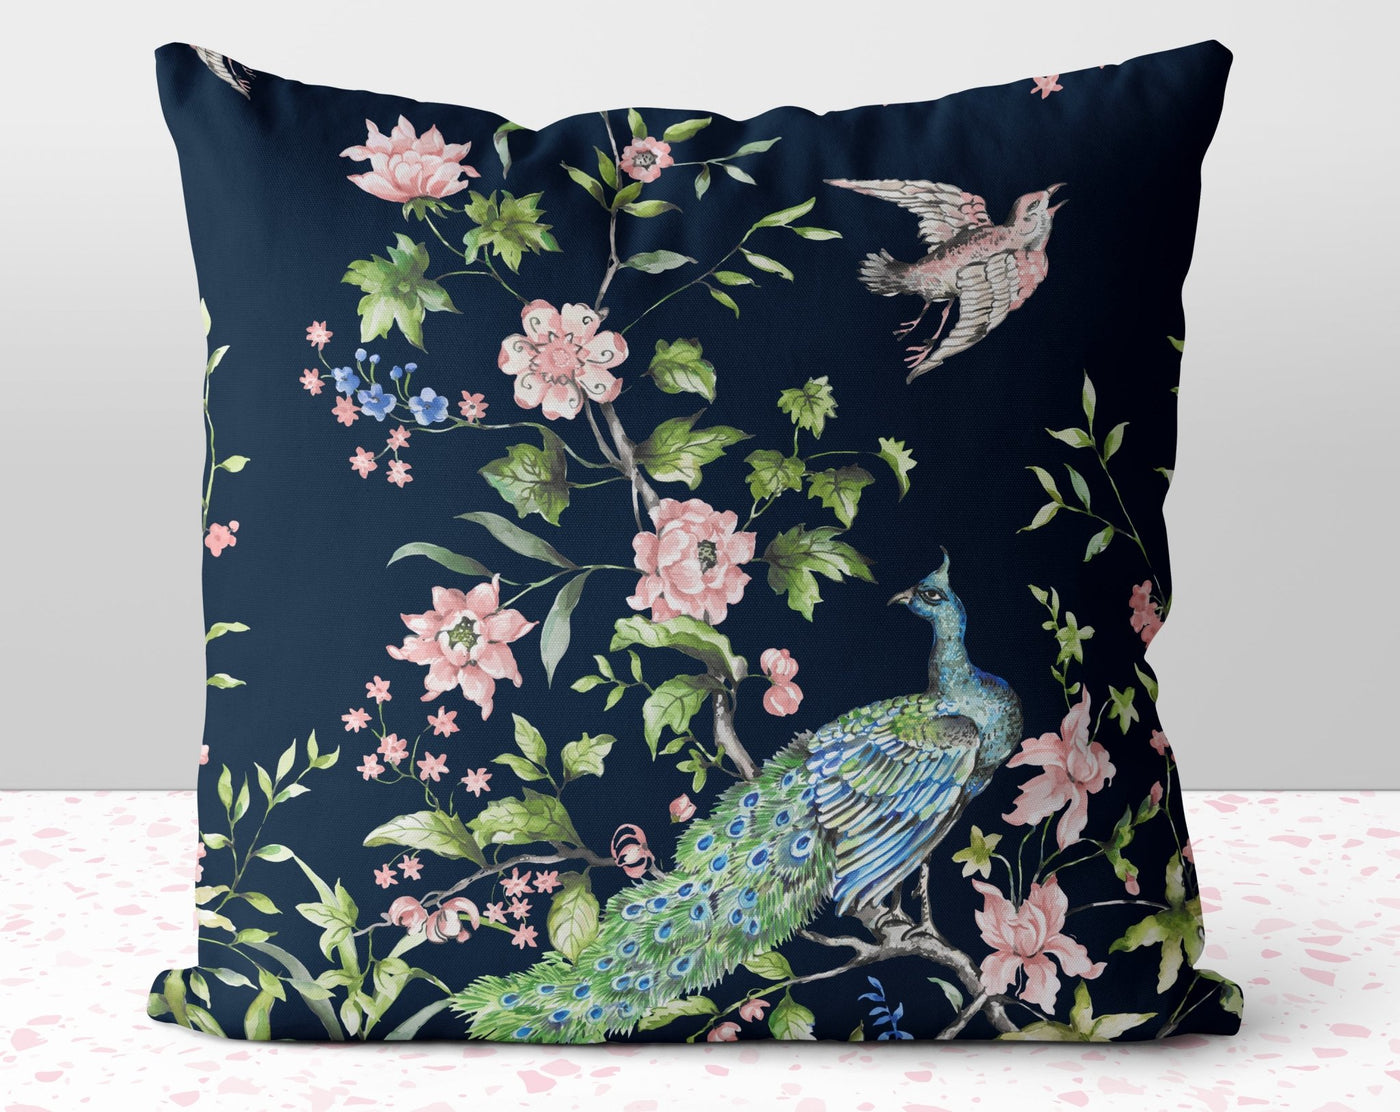 Floral Peacock Chinoiserie Pink Flowers Blue Pillow Throw Cover with Insert - Cush Potato Pillows